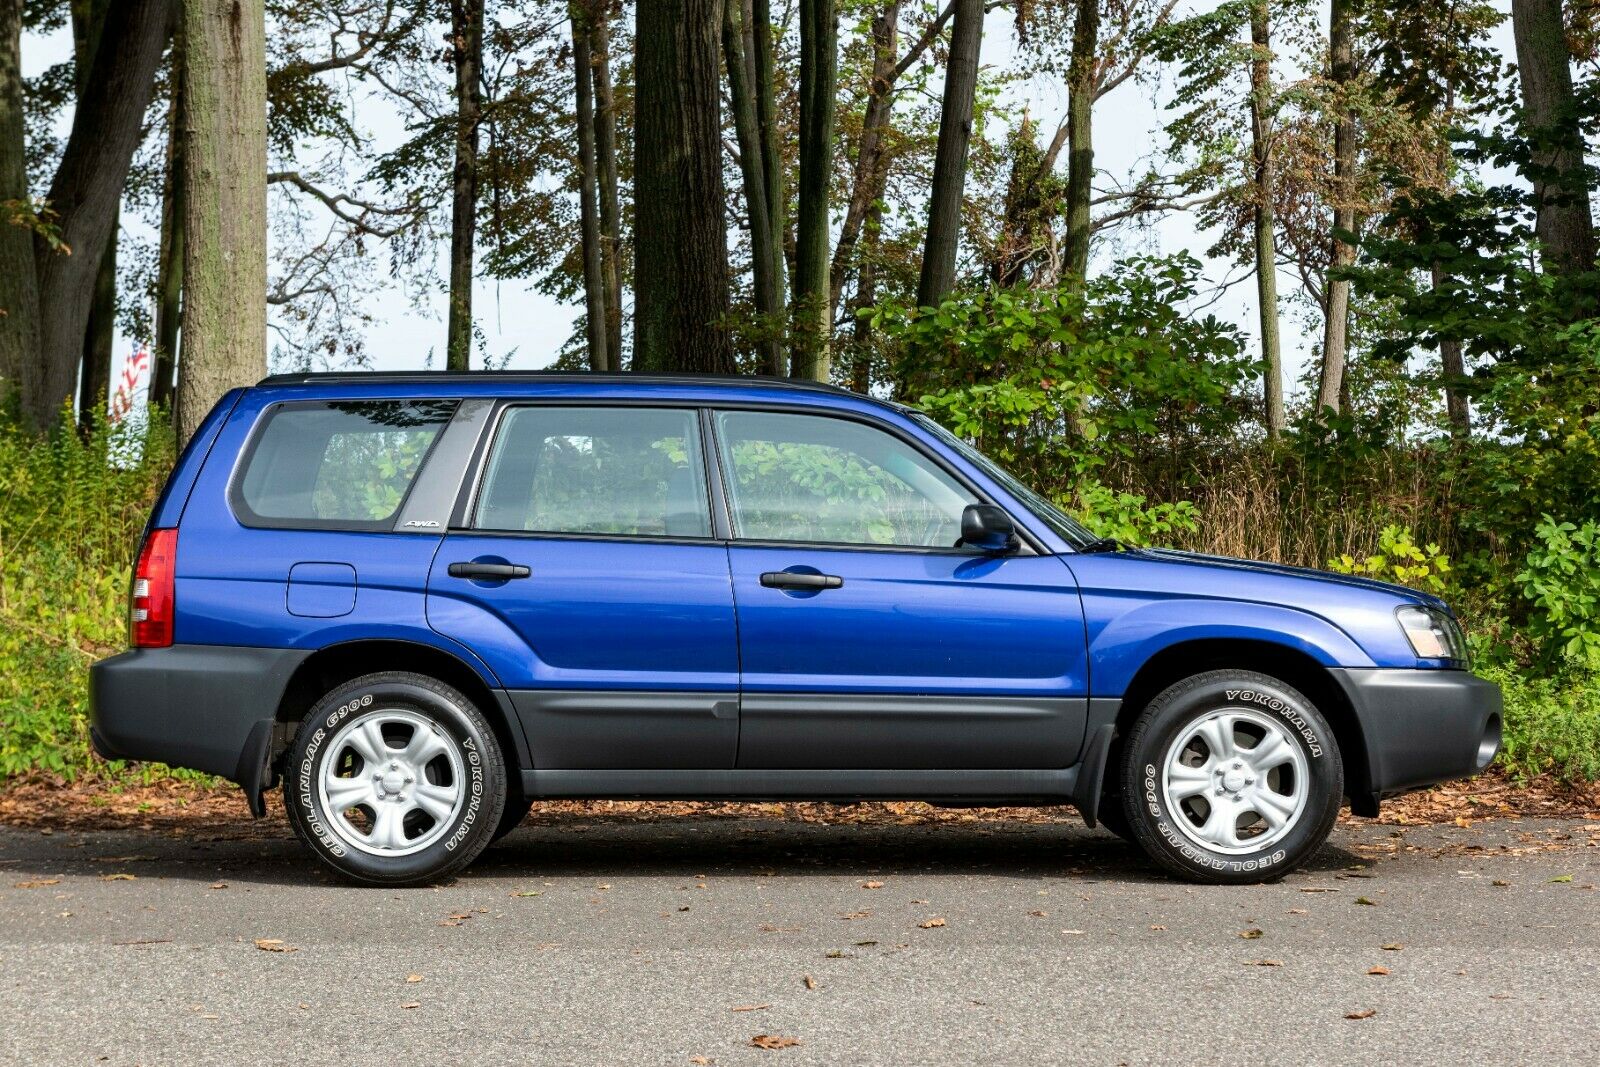 This Pristine 2003 Subaru Forester Has Just 6,450 Miles On